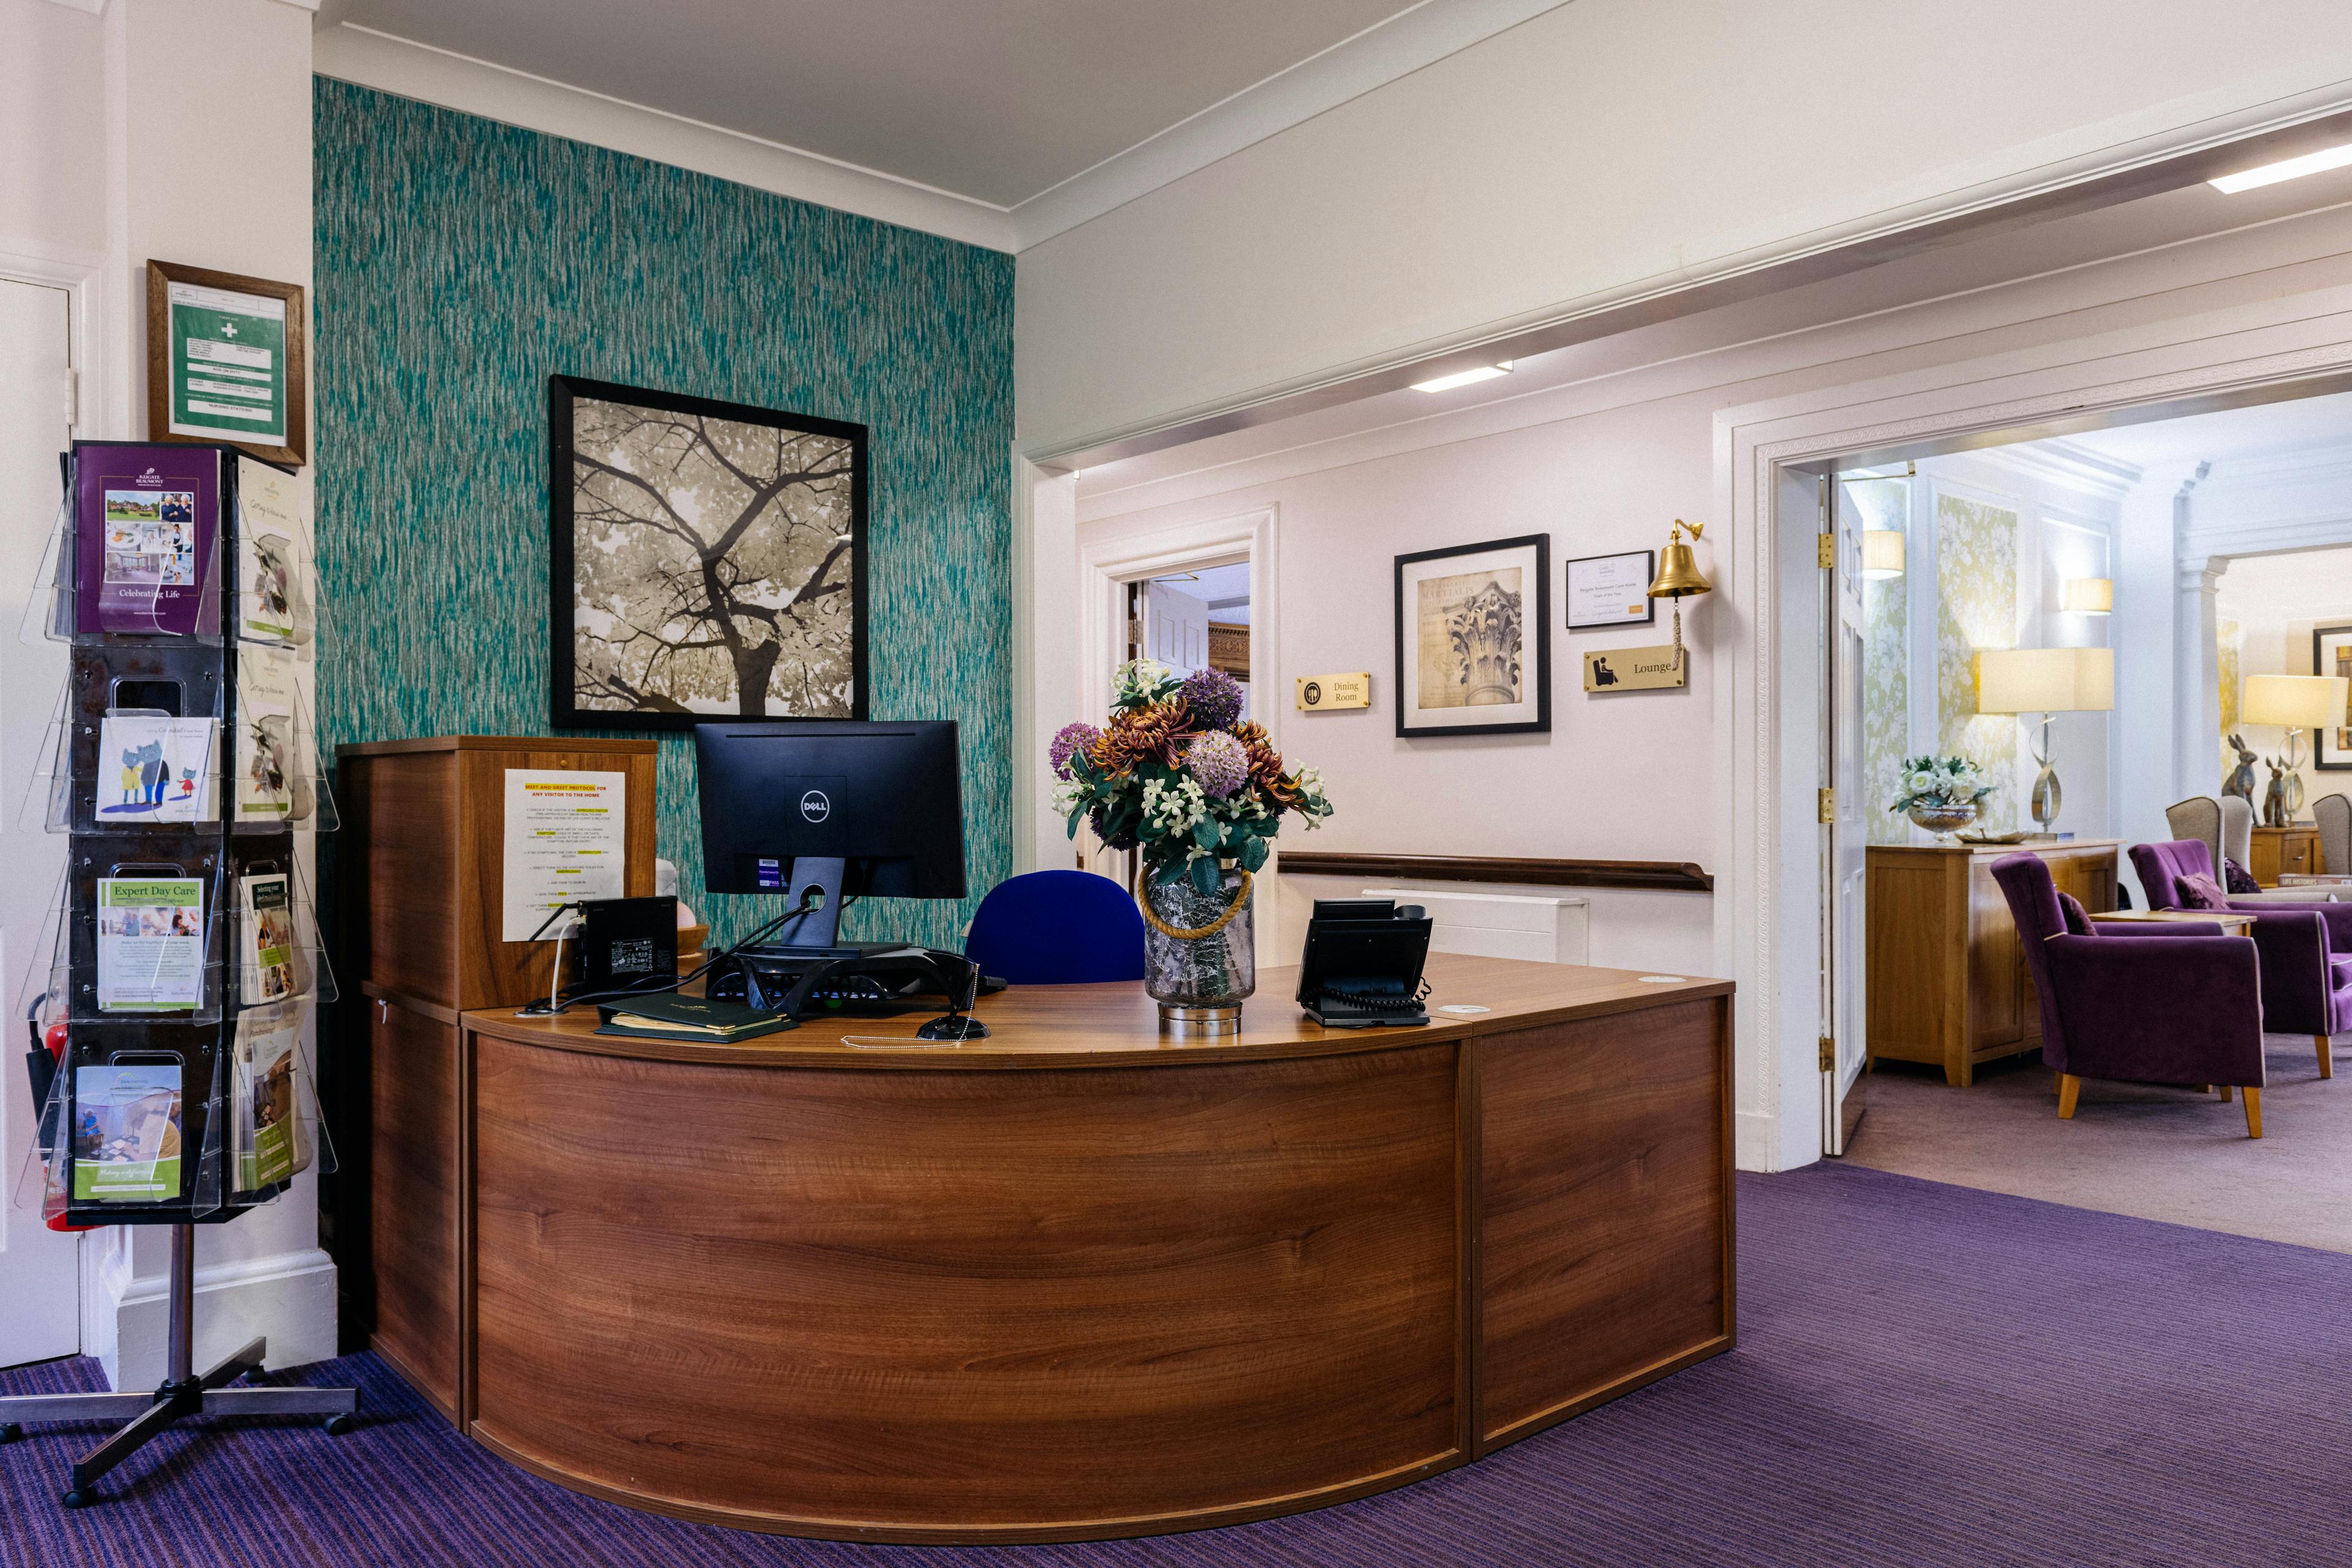 Reception at Reigate Beaumont Care Home in Reigate, Surrey